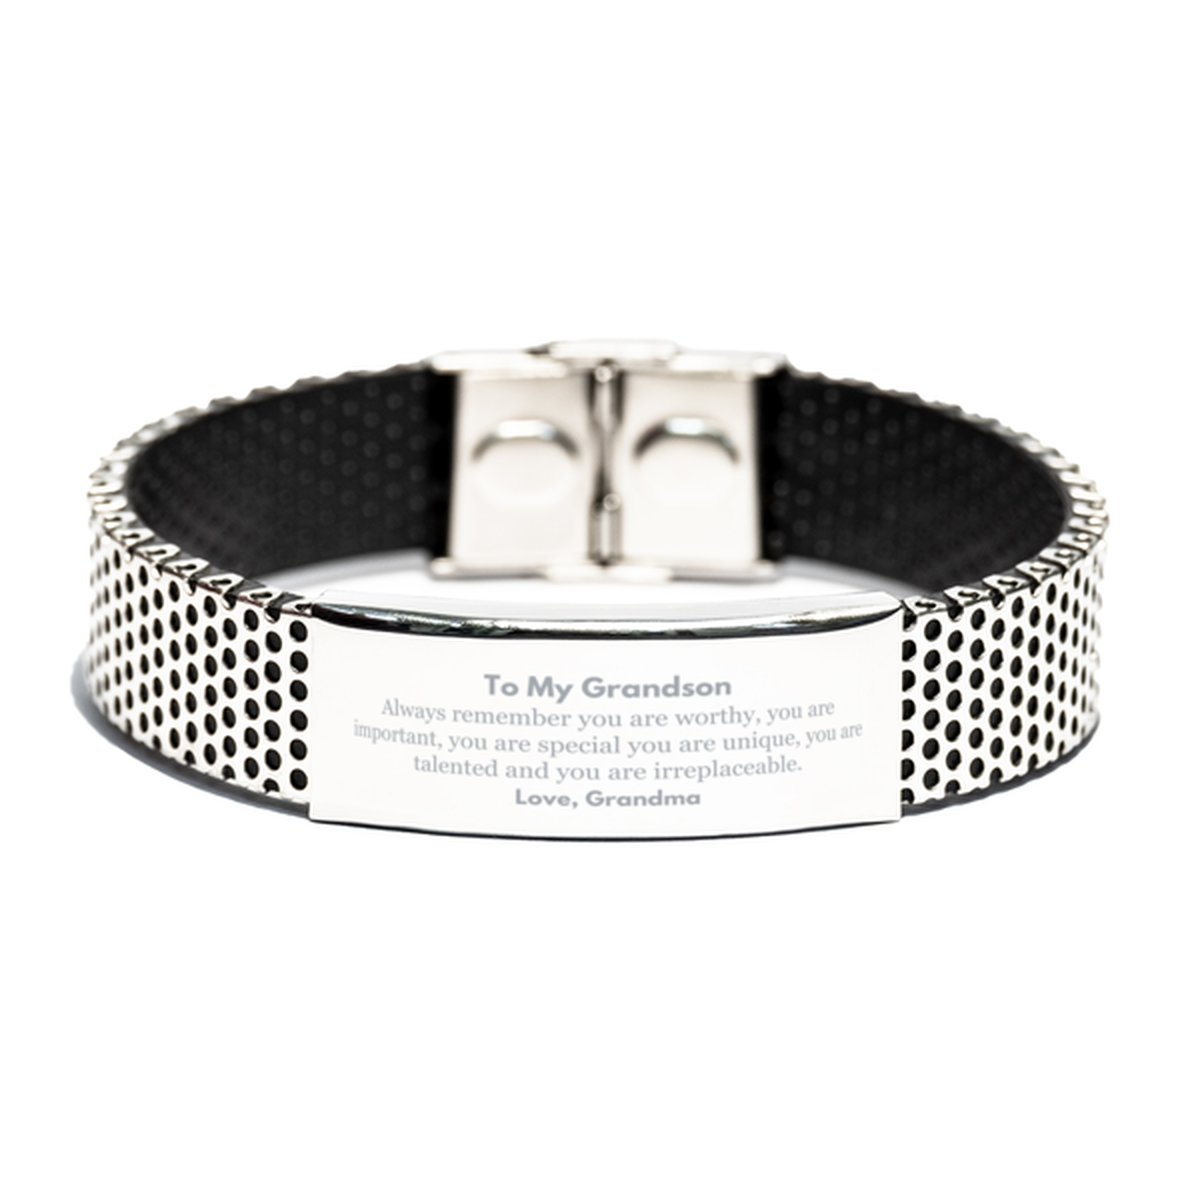 Grandson Birthday Gifts from Grandma, Inspirational Stainless Steel Bracelet for Grandson Christmas Graduation Gifts for Grandson Always remember you are worthy, you are important. Love, Grandma